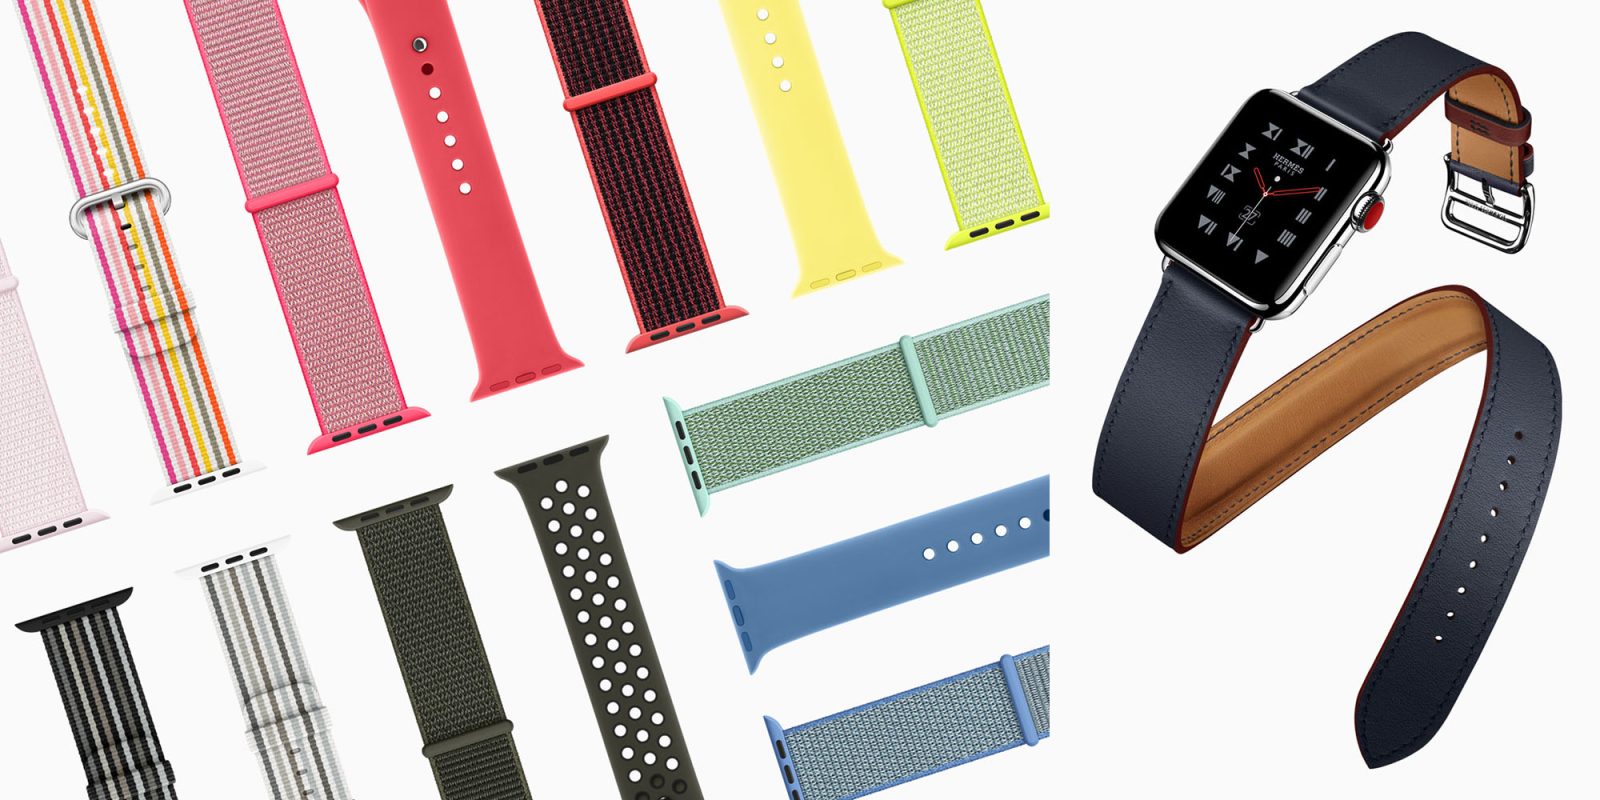 New Apple Watch band connector | Apple promo image of bands, inc expensive Hermès one